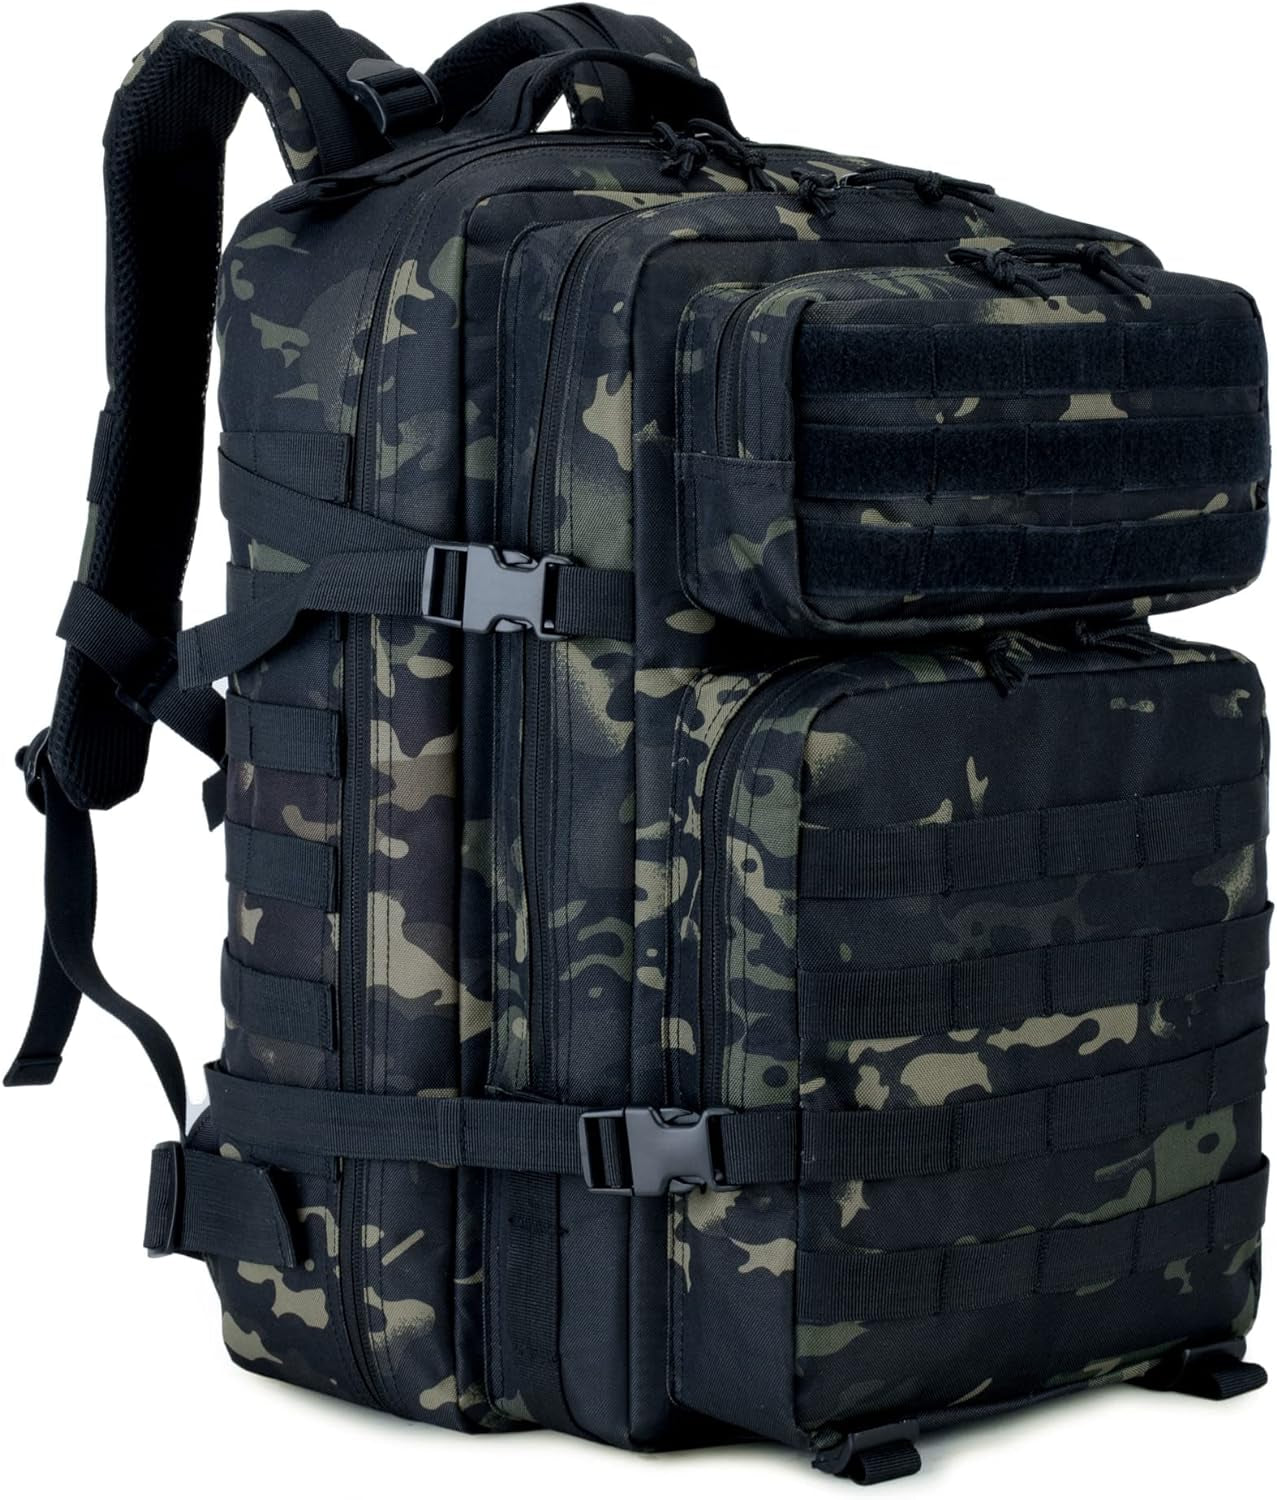 45L Tactical Assault Backpack 3 Day Assault Pack with Molle Waterproof Backpack Rucksack for Tactical Backpacks (Blackwhite Camo)